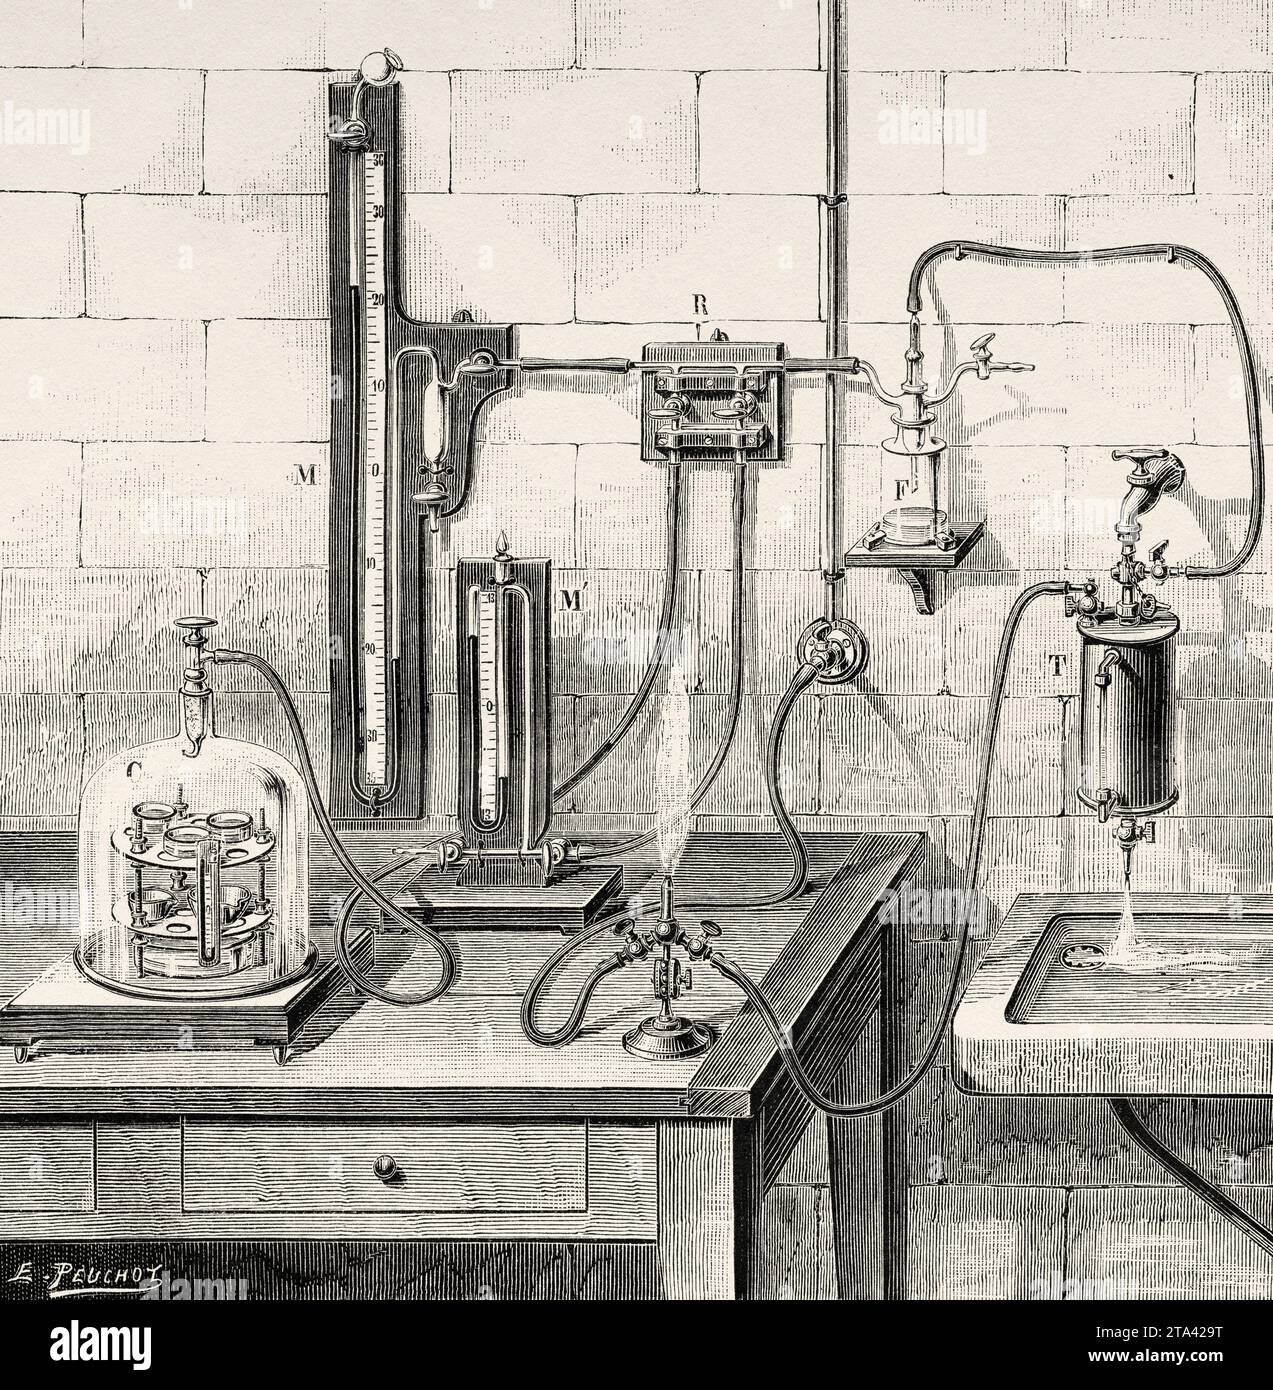 Laboratory tools. Suction and blowing tube and its applications in the laboratory T- Apparatus assembly, F- Safety bottle, R-  Glass taps, M- Manometer, C- Bell with ground edges. Old illustration from La Nature 1887 Stock Photo